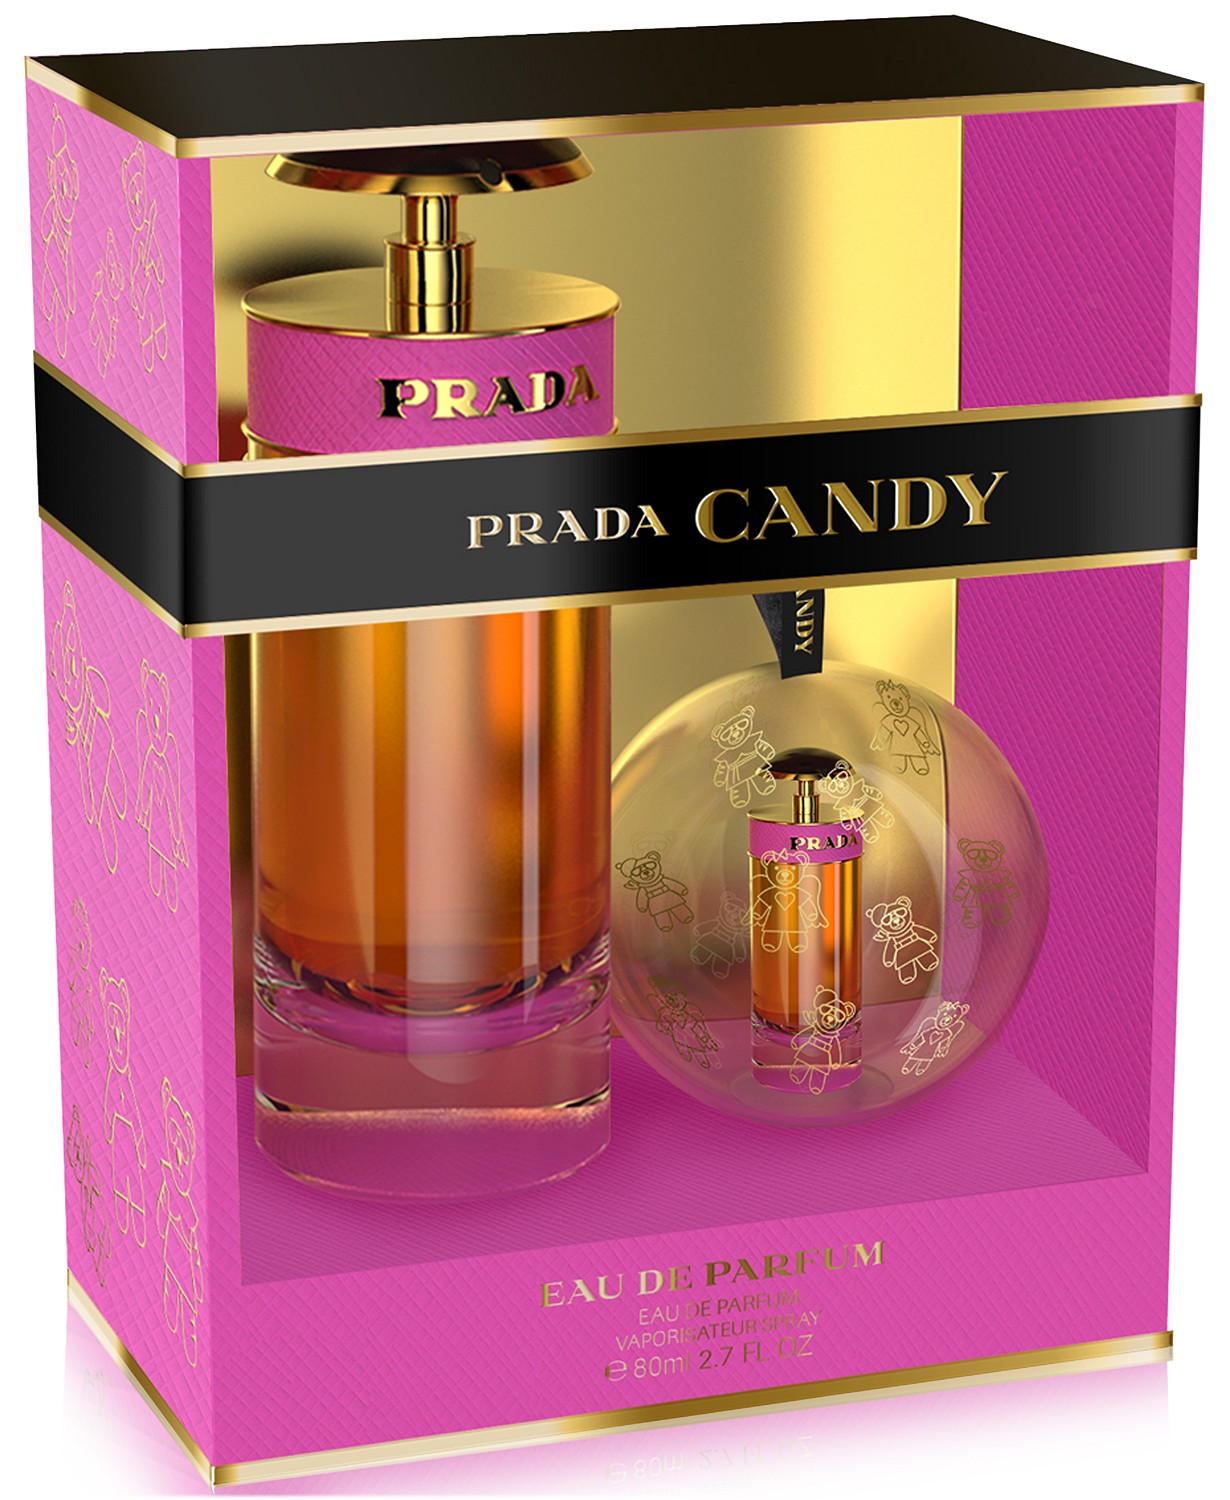 Perfume Gift Set | Hot Sex Picture